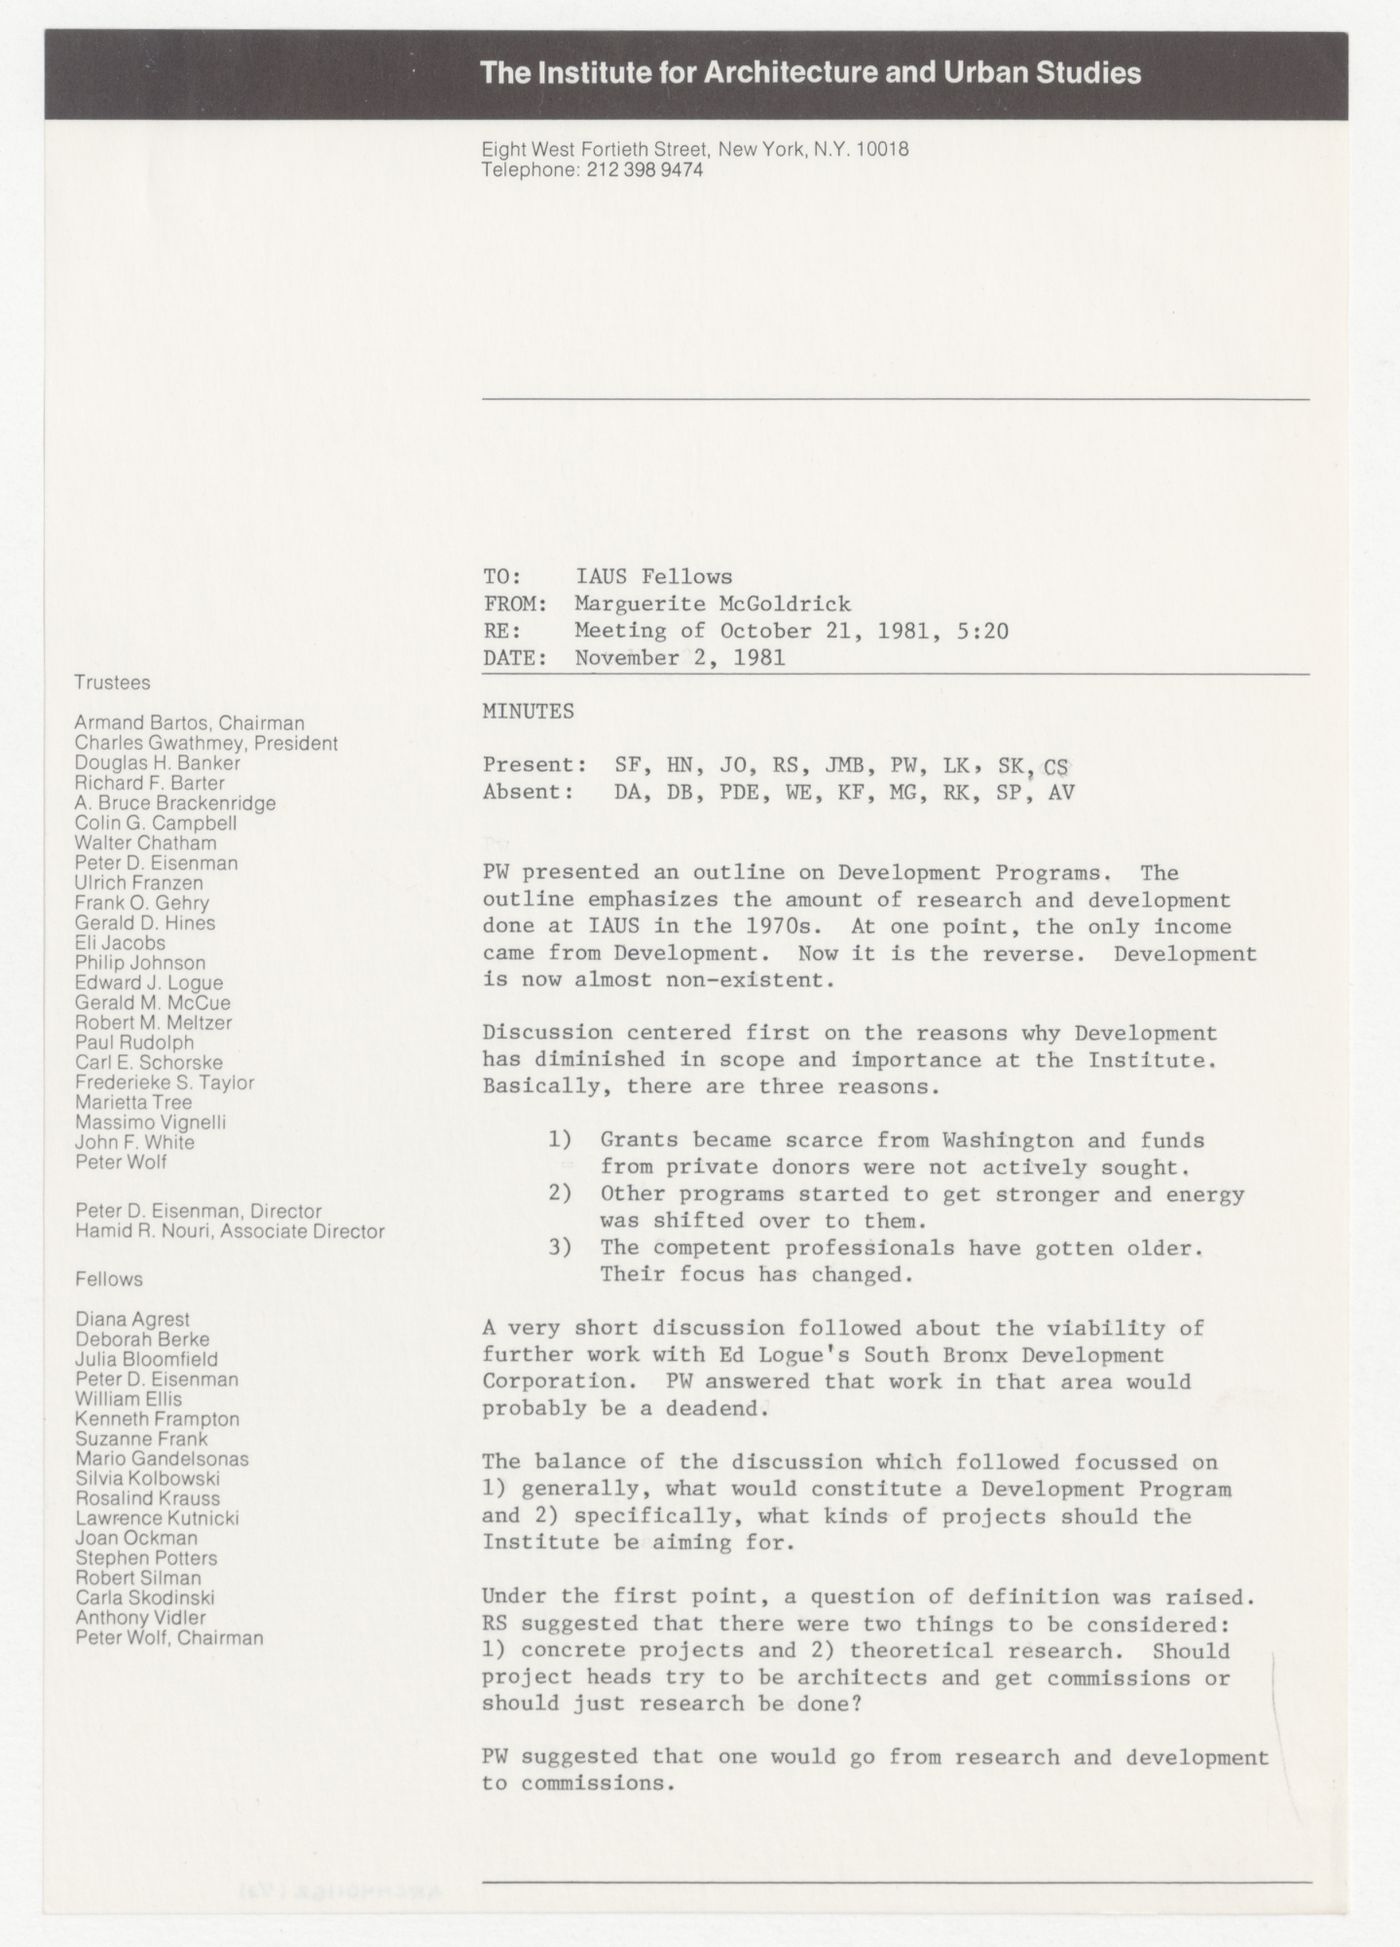 MInutes of meeting of the Fellows on October 21, 1981